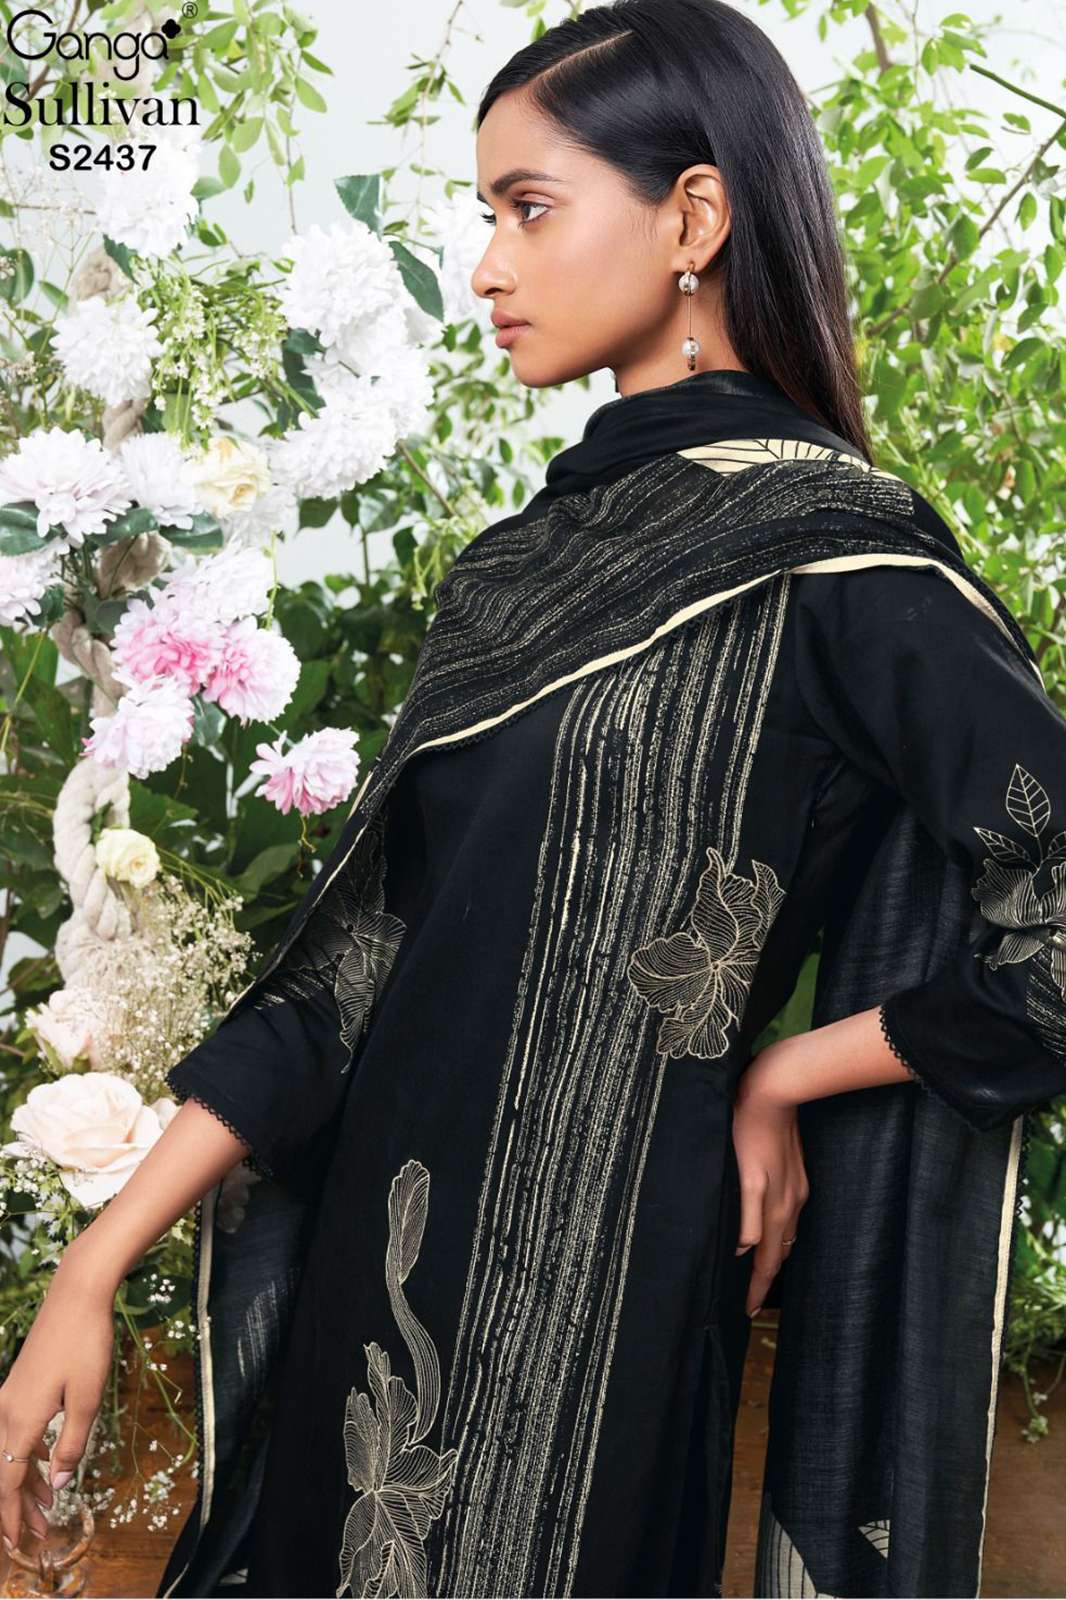  Ganga Sullivan 2437 COTTON SILK SATIN PRINTED WITH EXTRA SLEEVES AND EMBROIDERY & COTTON LACE ON SLEEVE